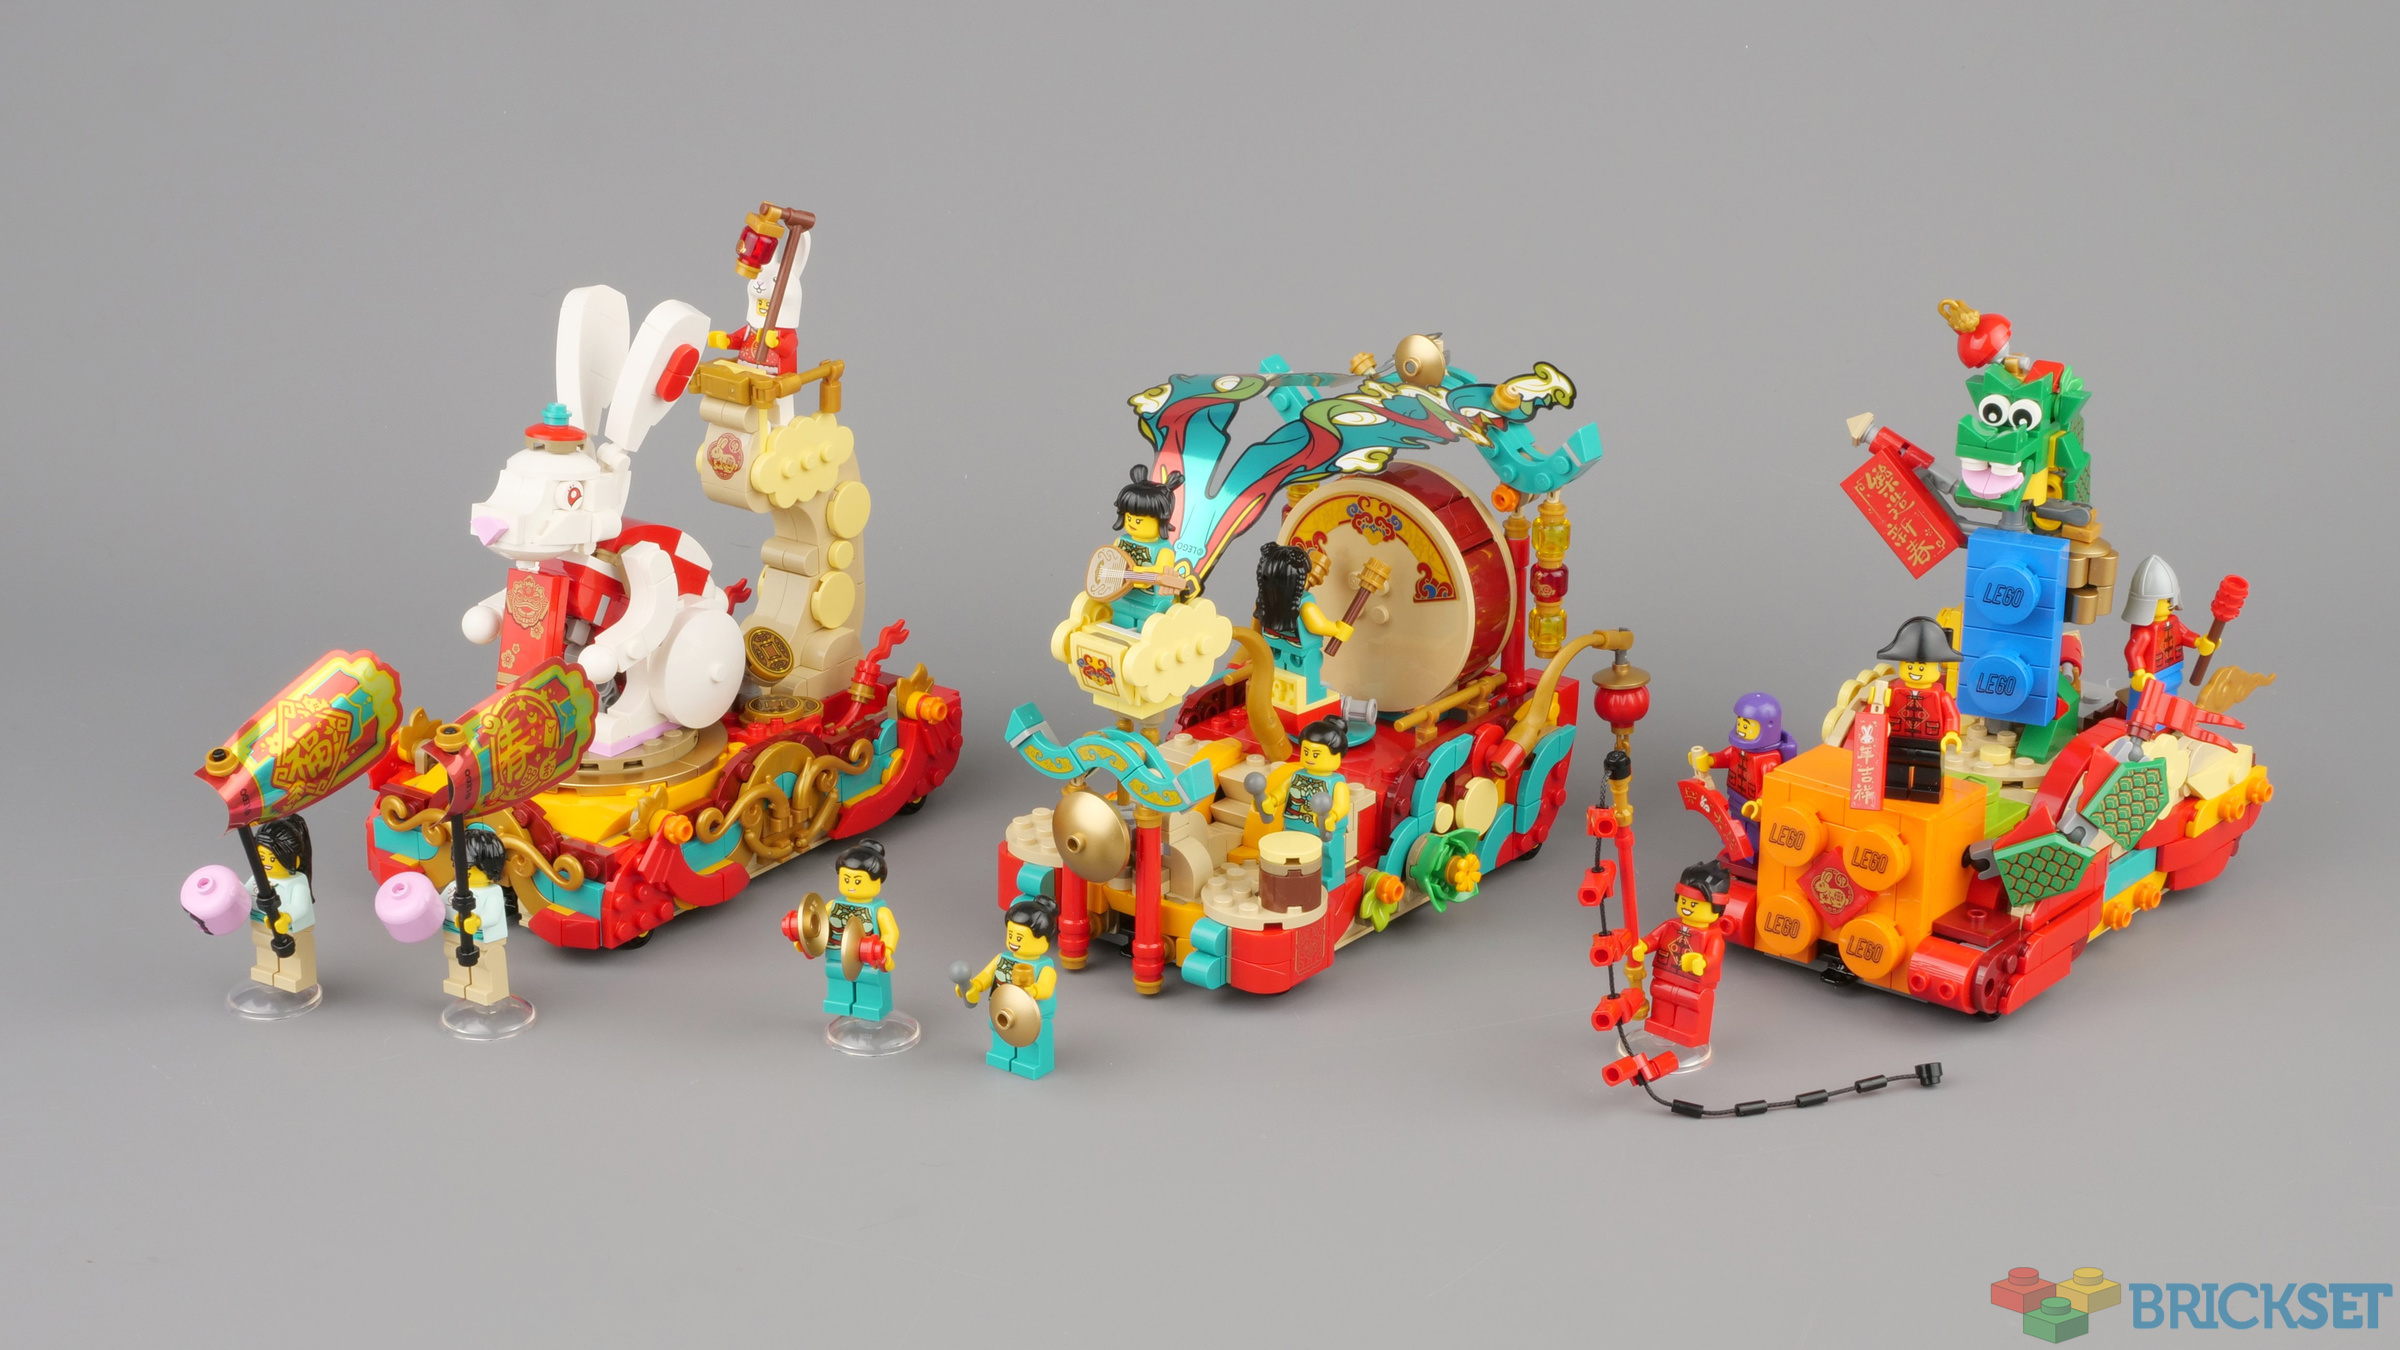 Costco's Dragon LEGO Set for Chinese New Year - Parade